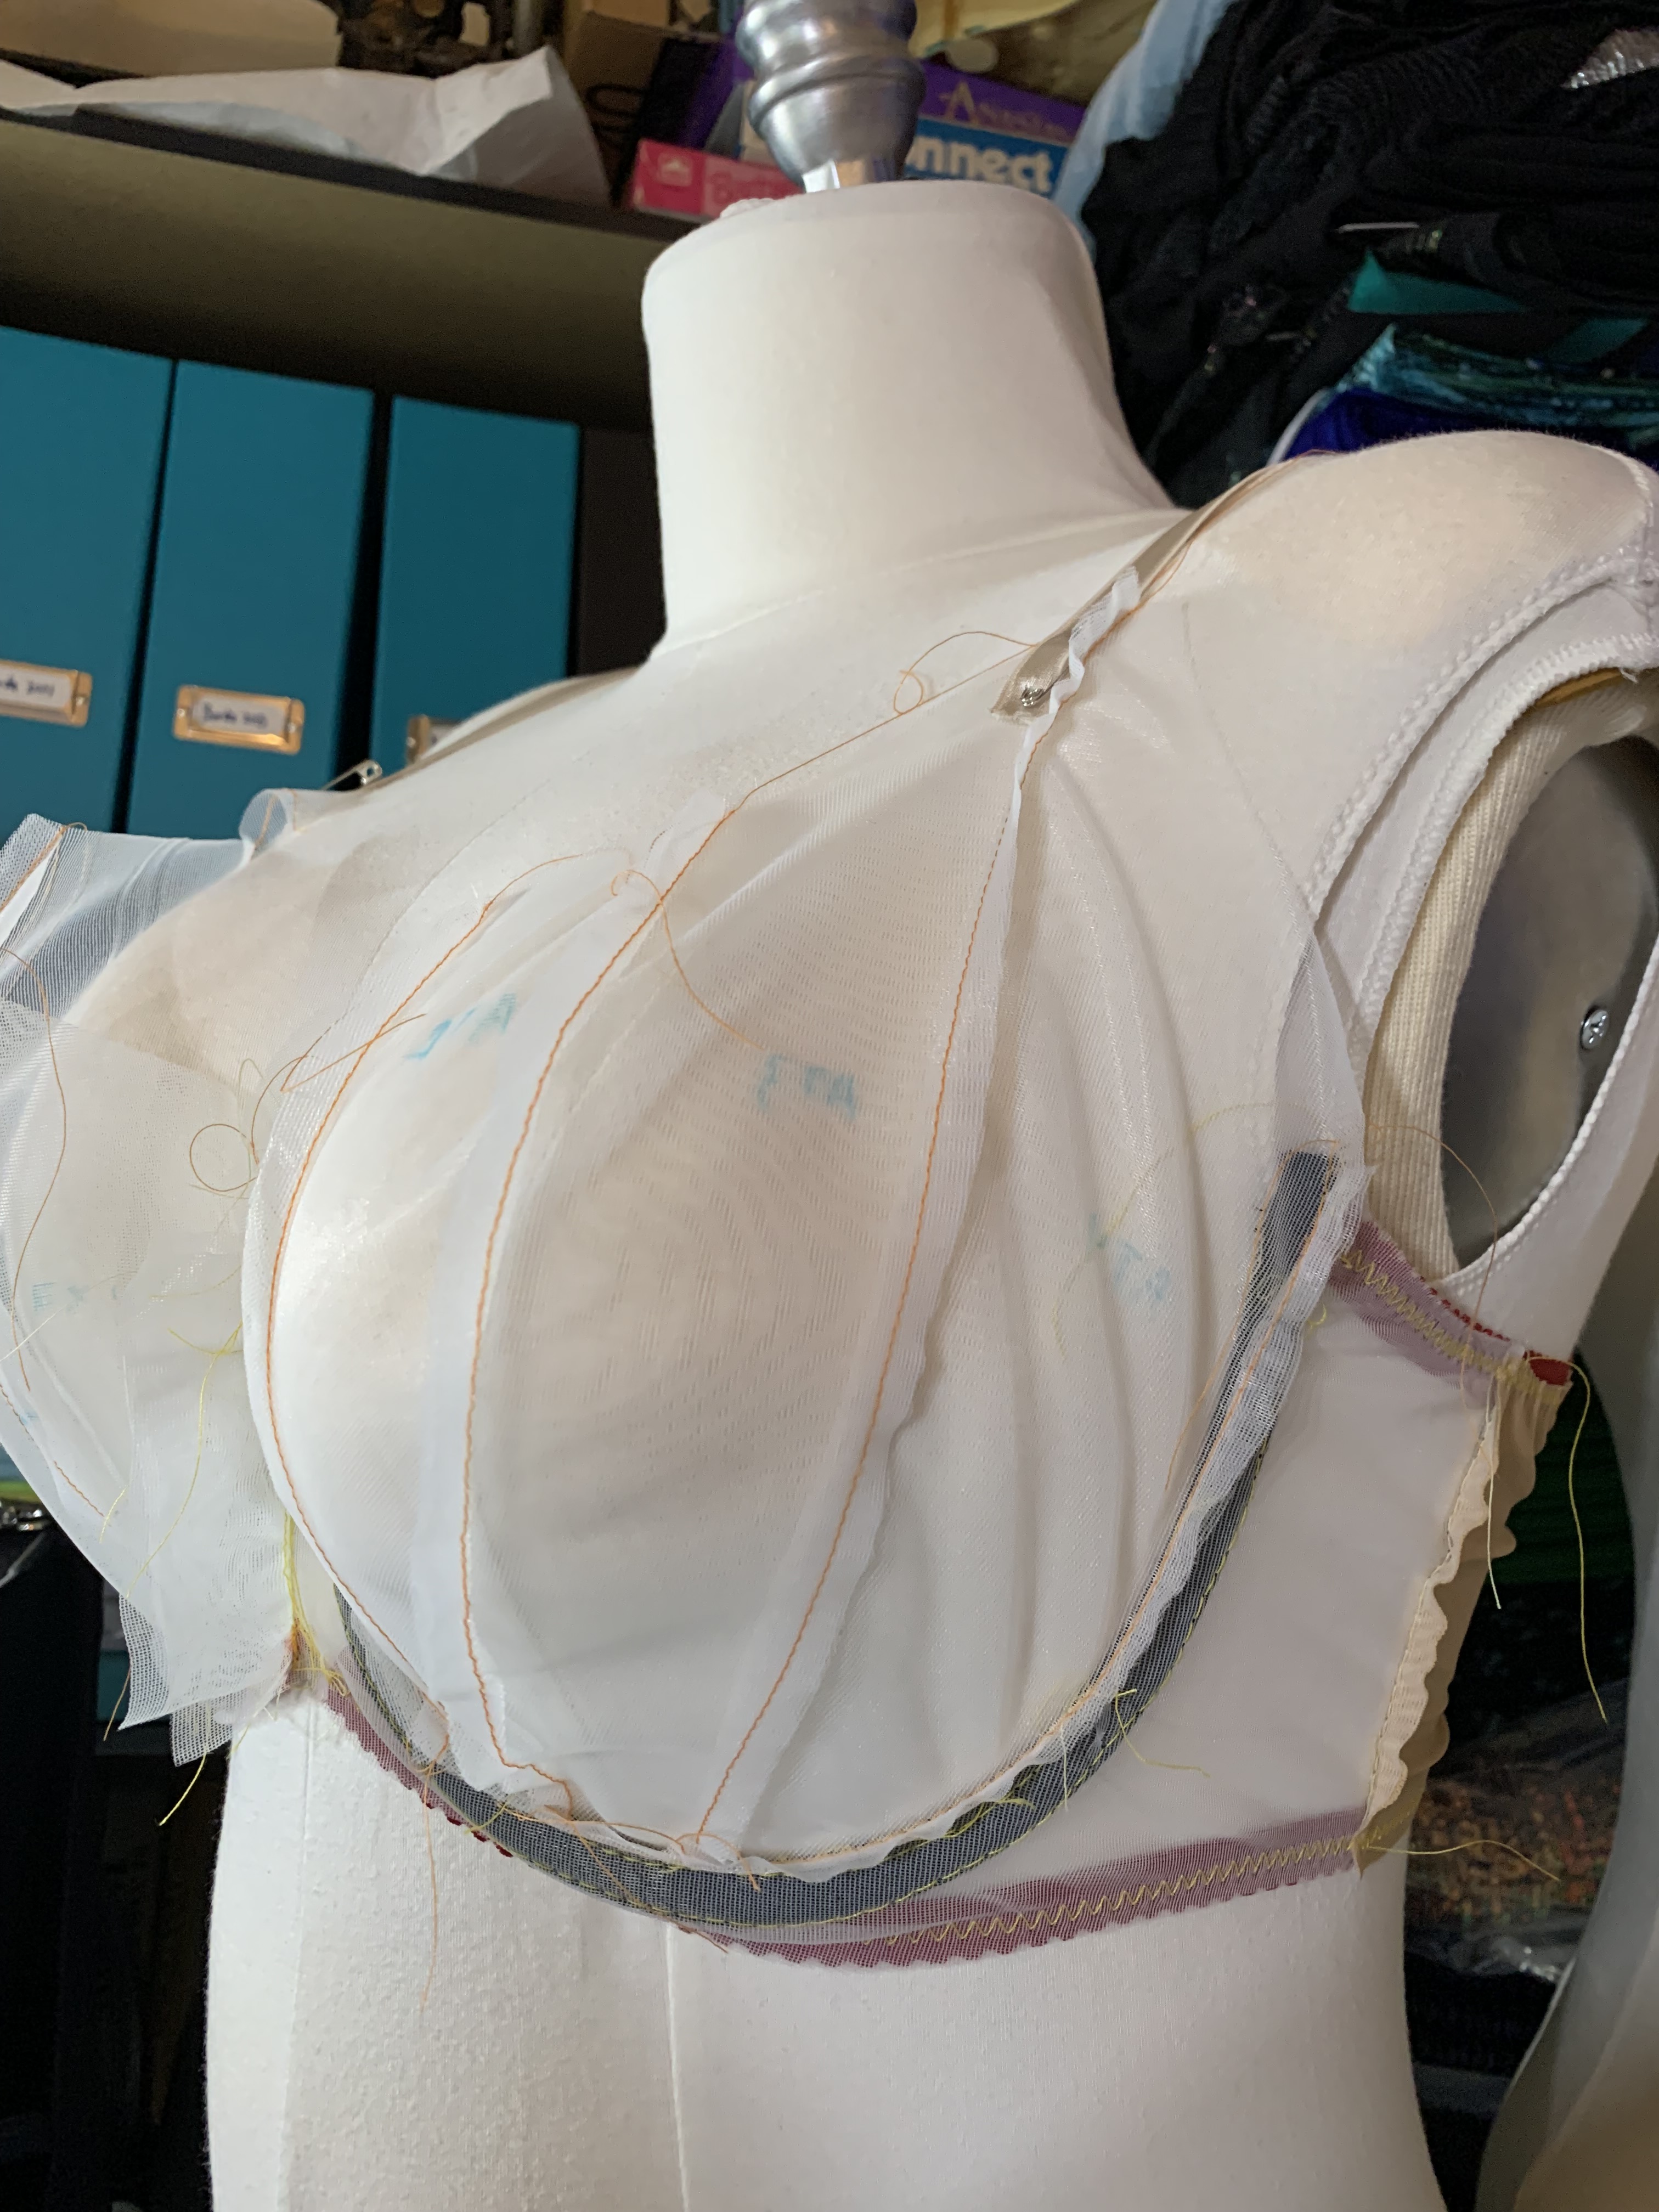 Package 3 and 4 for the Afi Exquisite Bra – Now available! – AFI Atelier